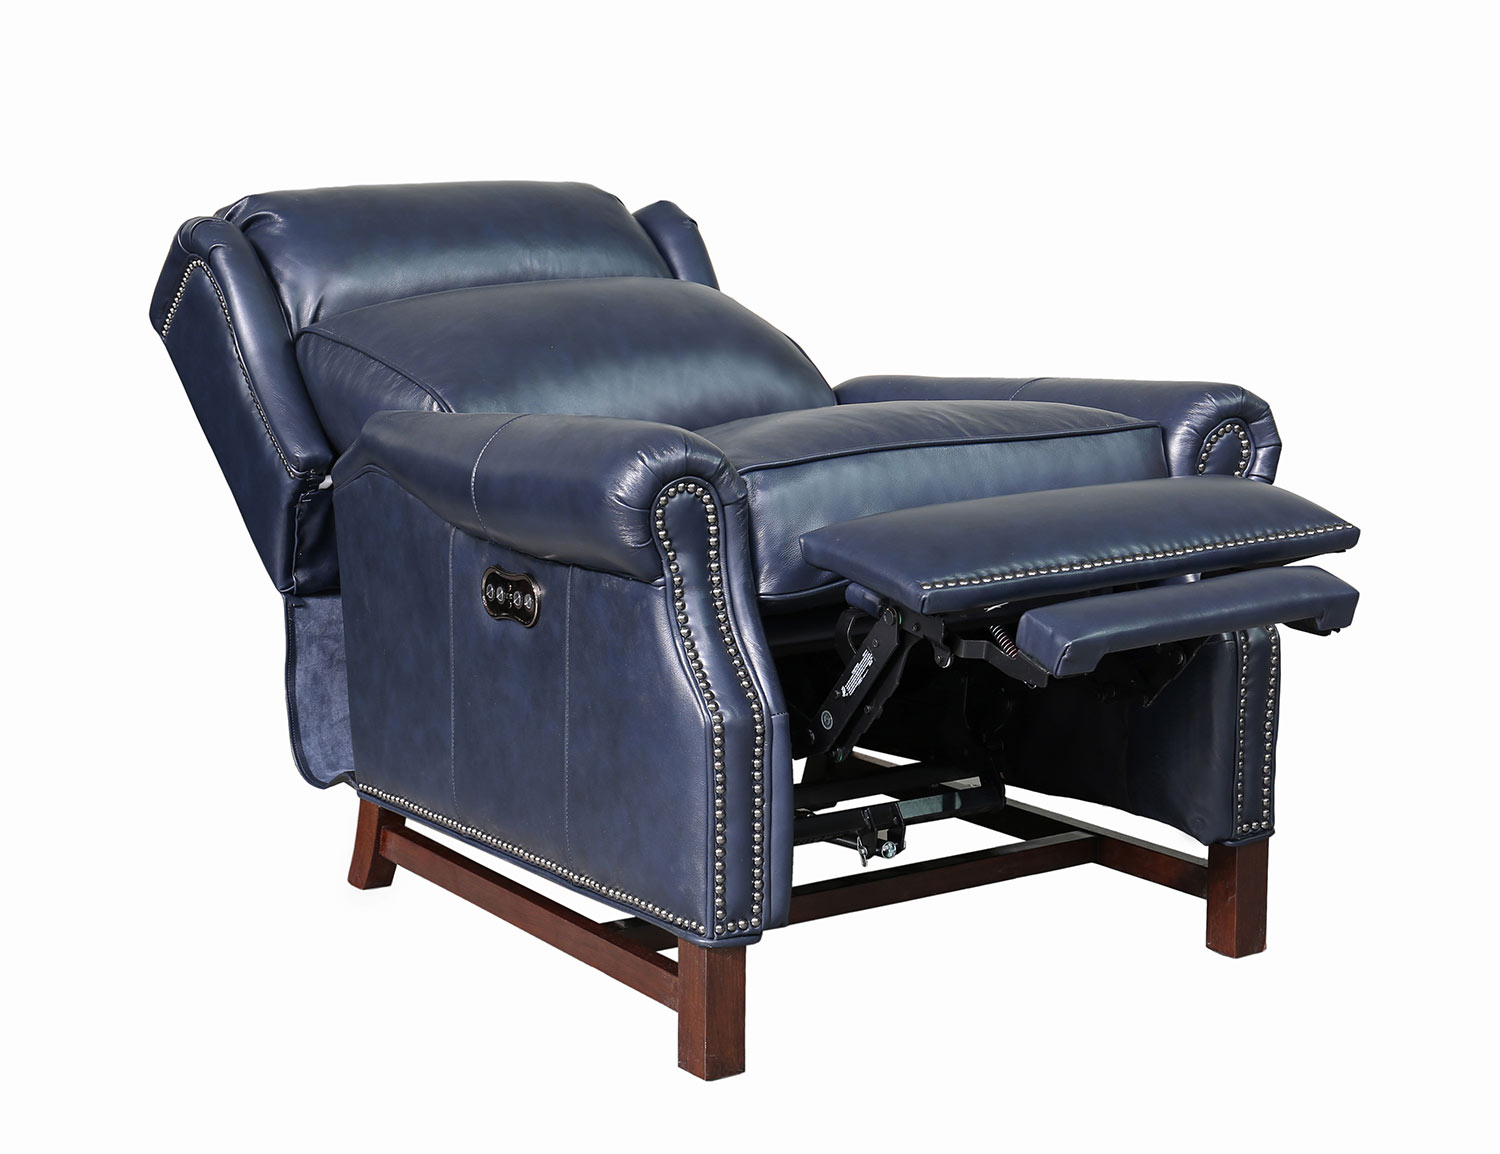 Barcalounger Thornfield Power Recliner Chair with Power Head Rest - Shoreham Blue/All Leather